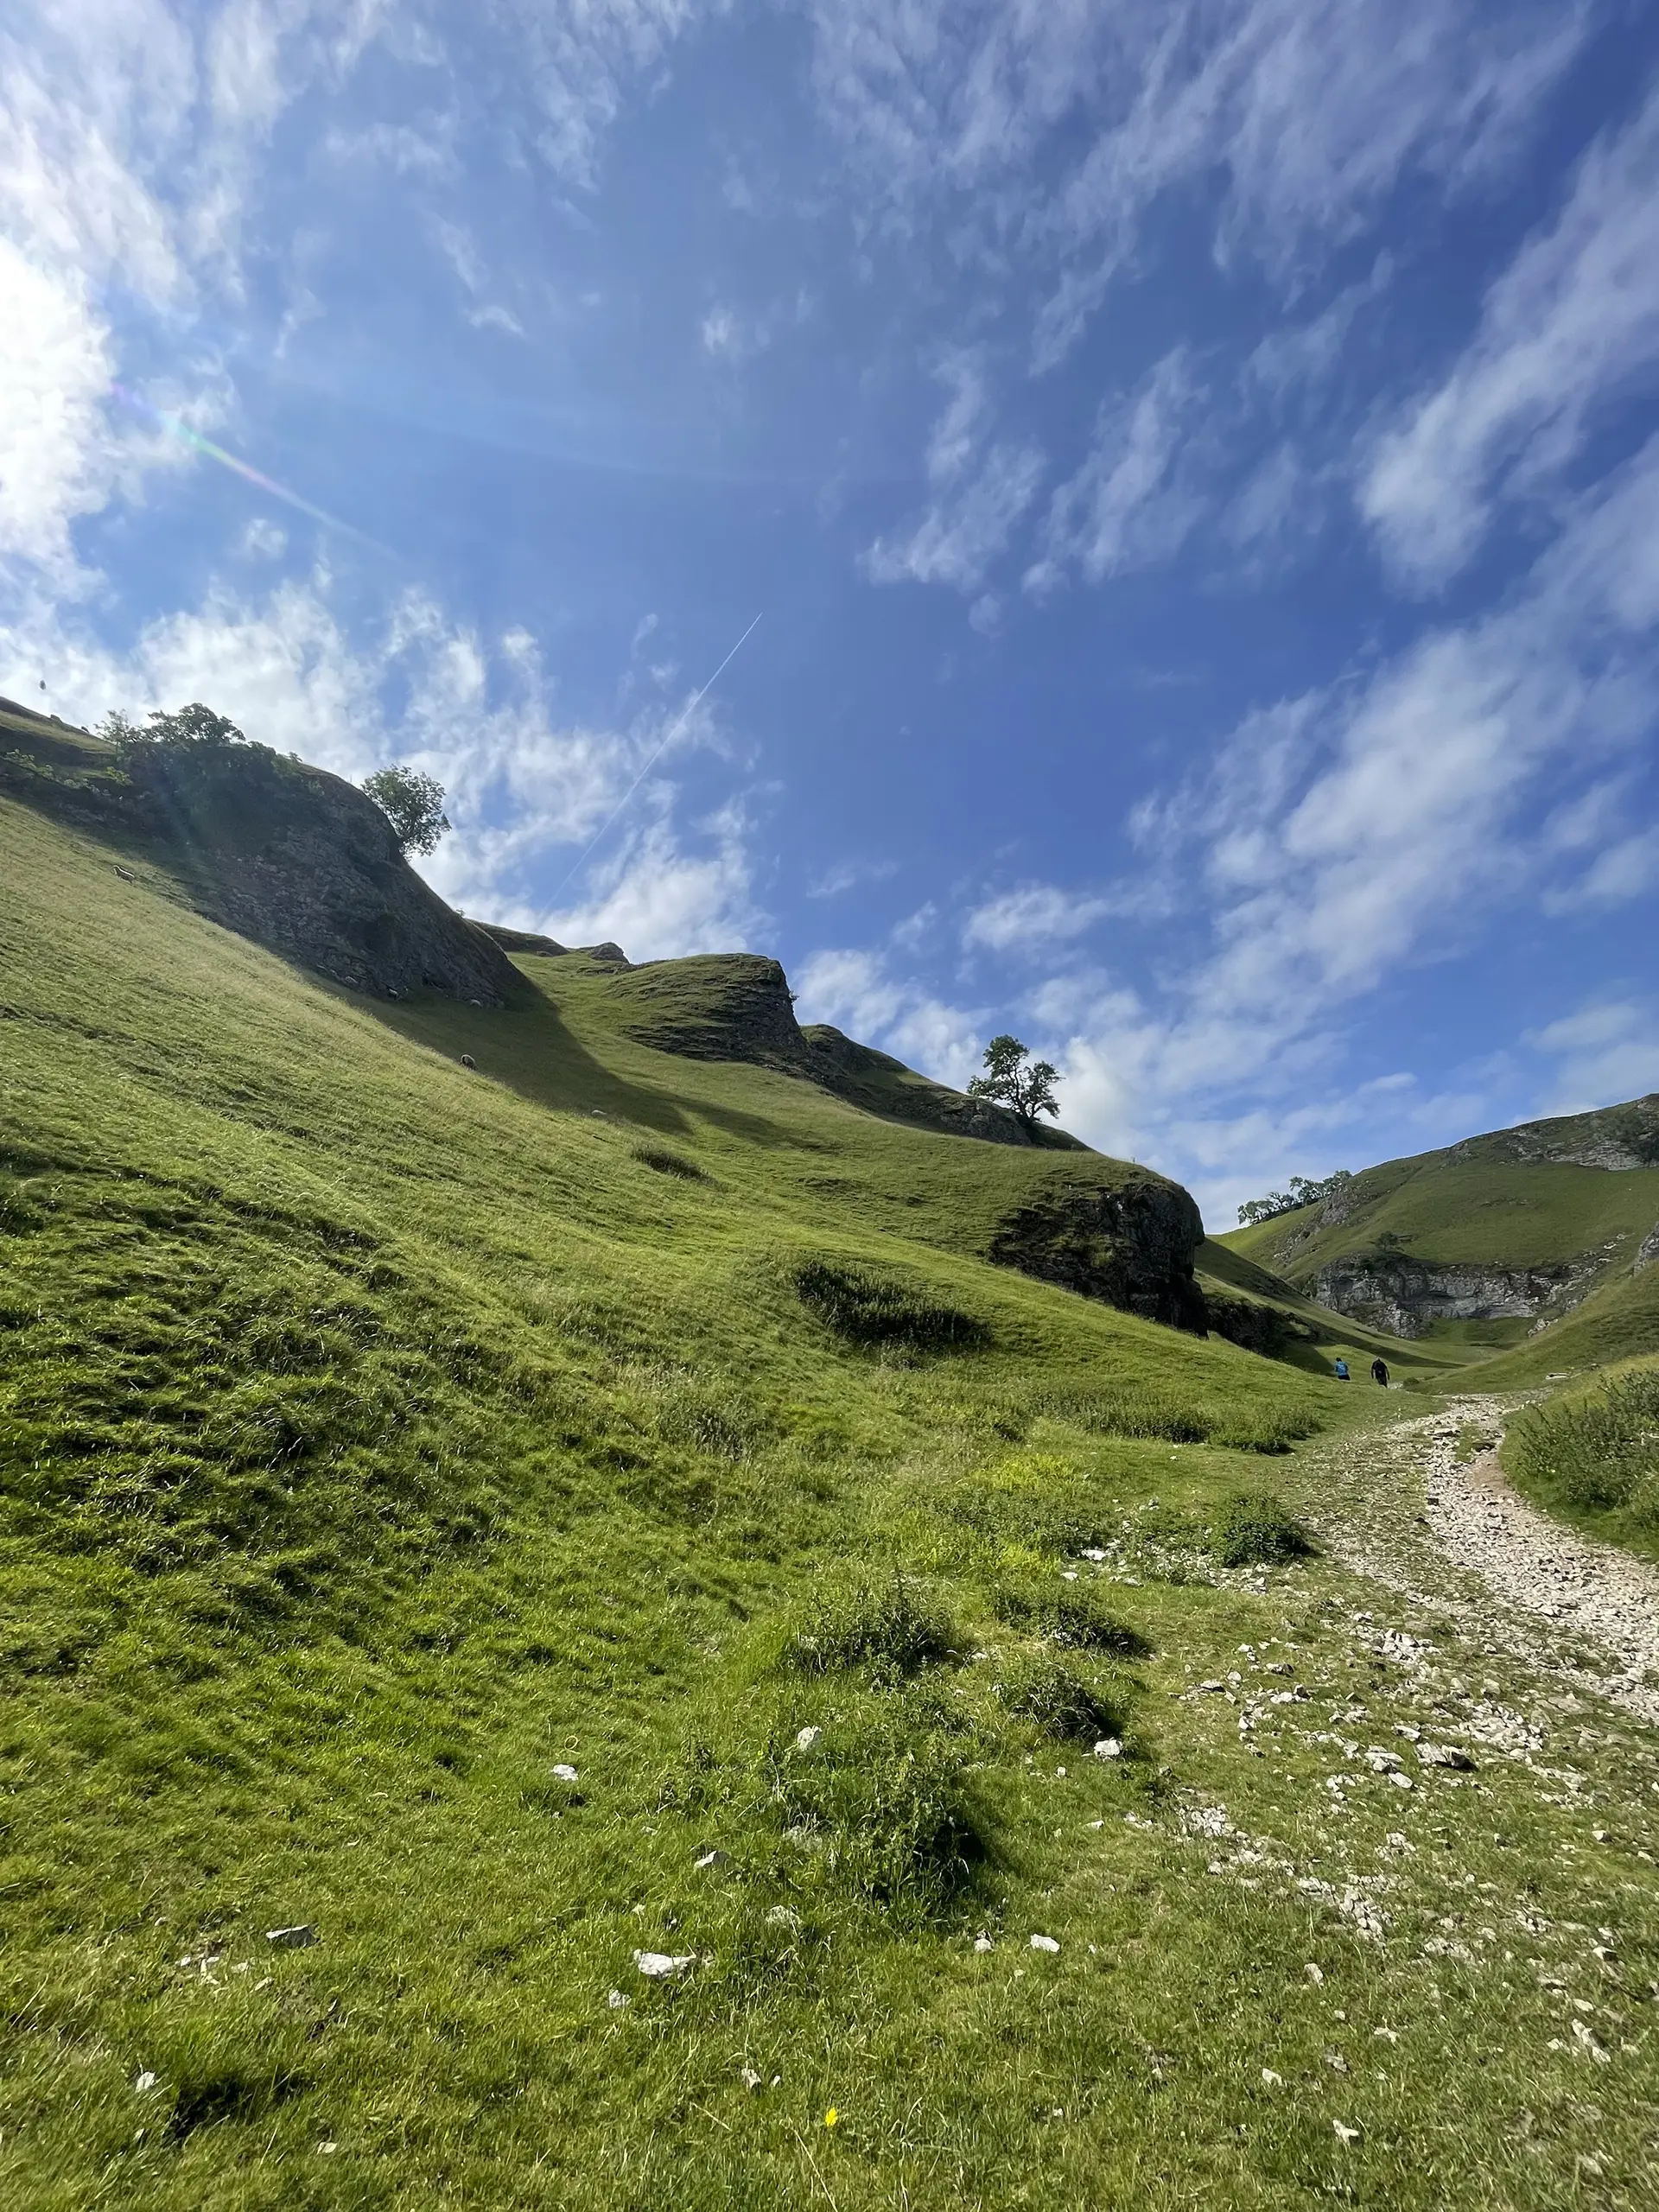 Cave Dale path opens out to reveal a stunning dry limestone valley.